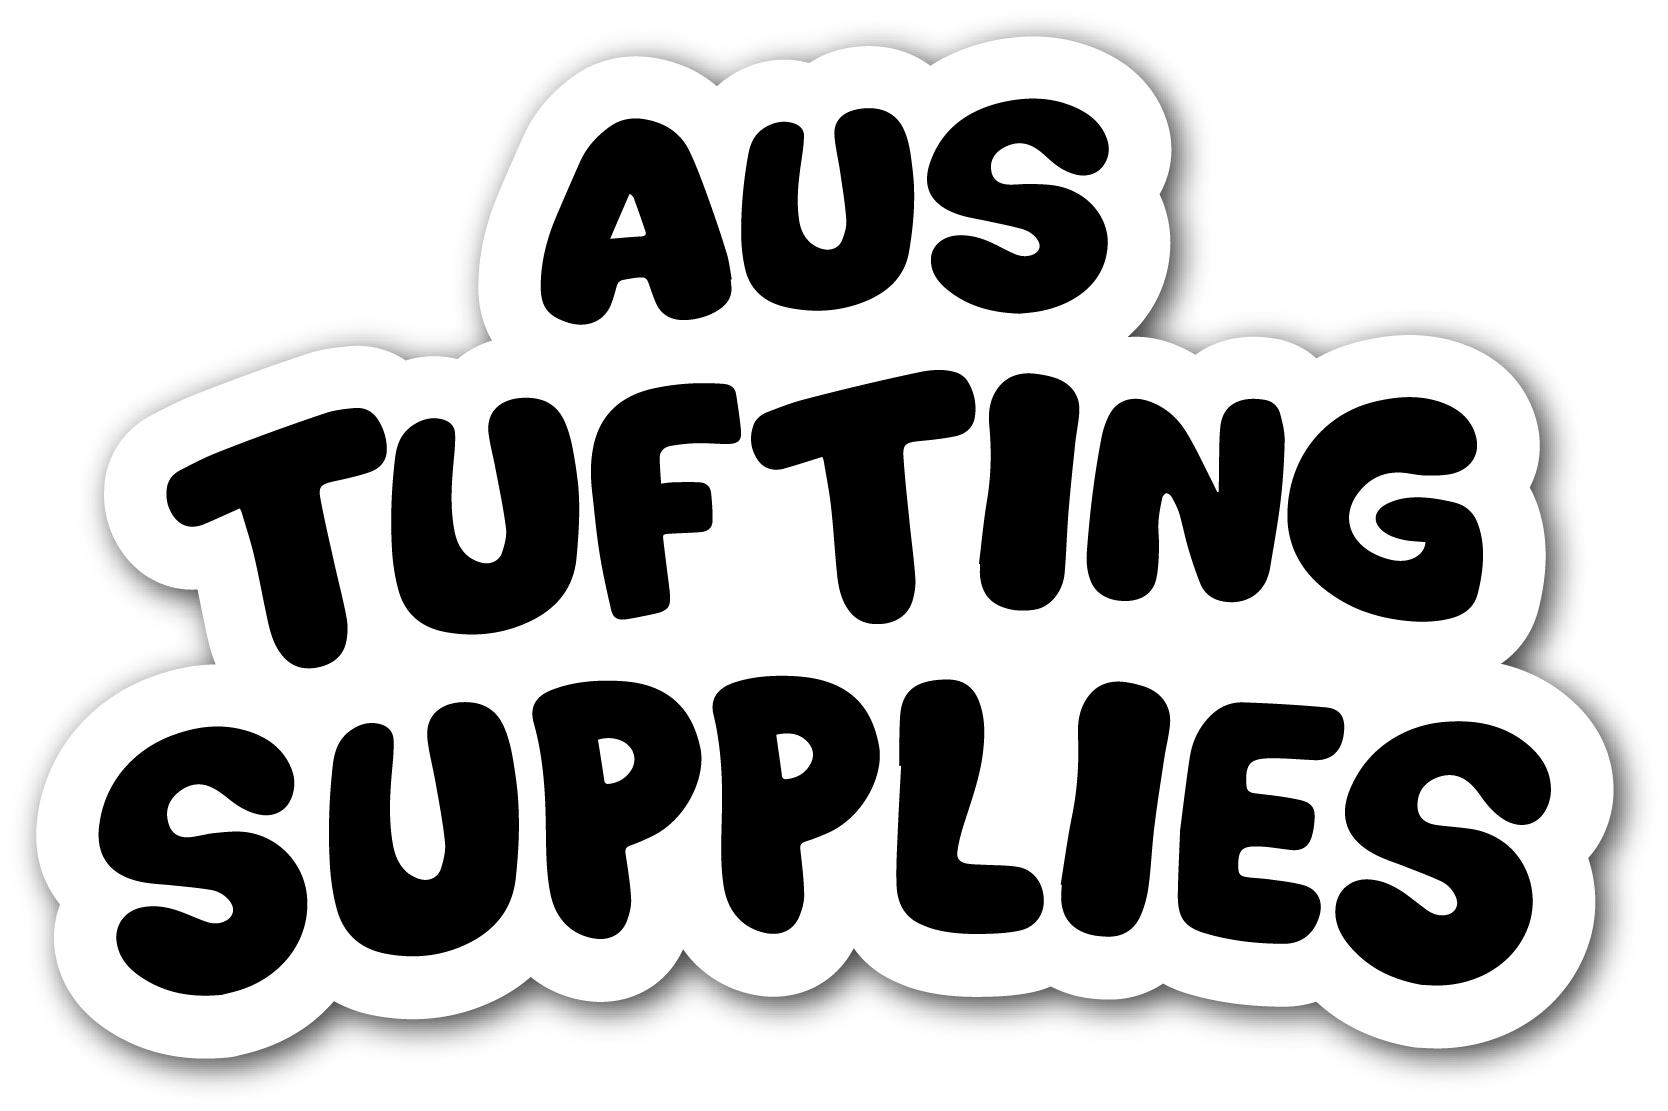 Rug Tufting Machines and Supplies